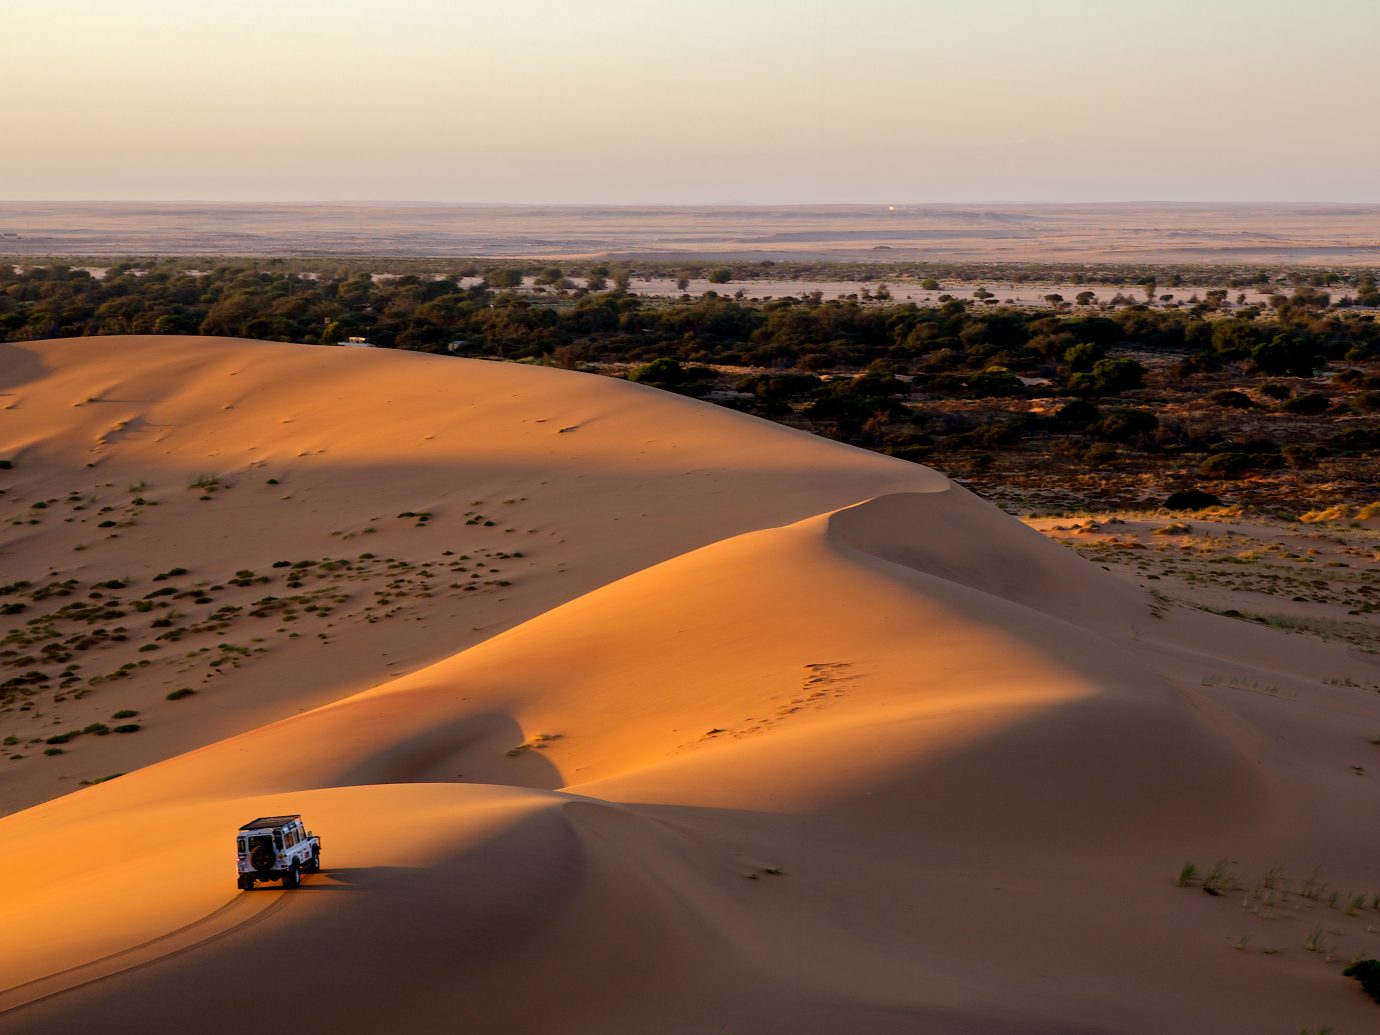 A car is driving through sand dunes